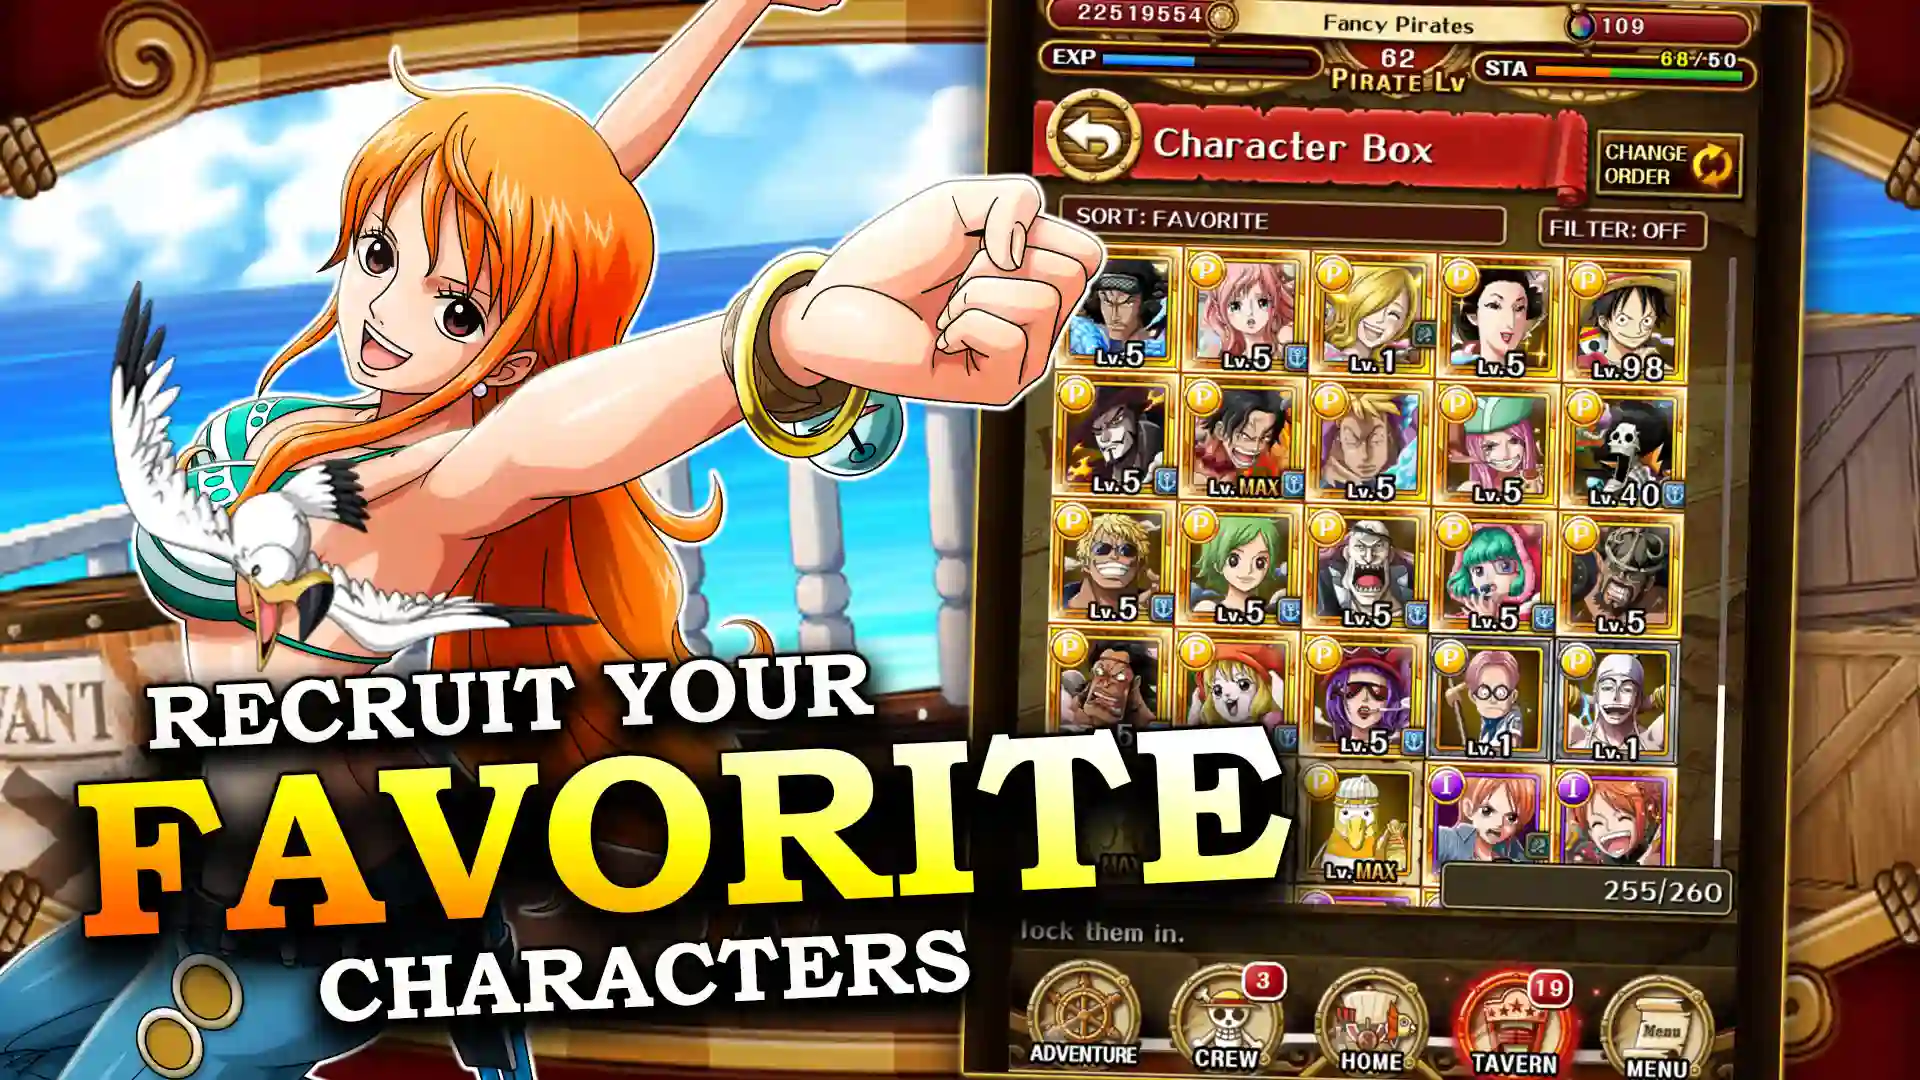 What is One Piece Treasure Cruise?